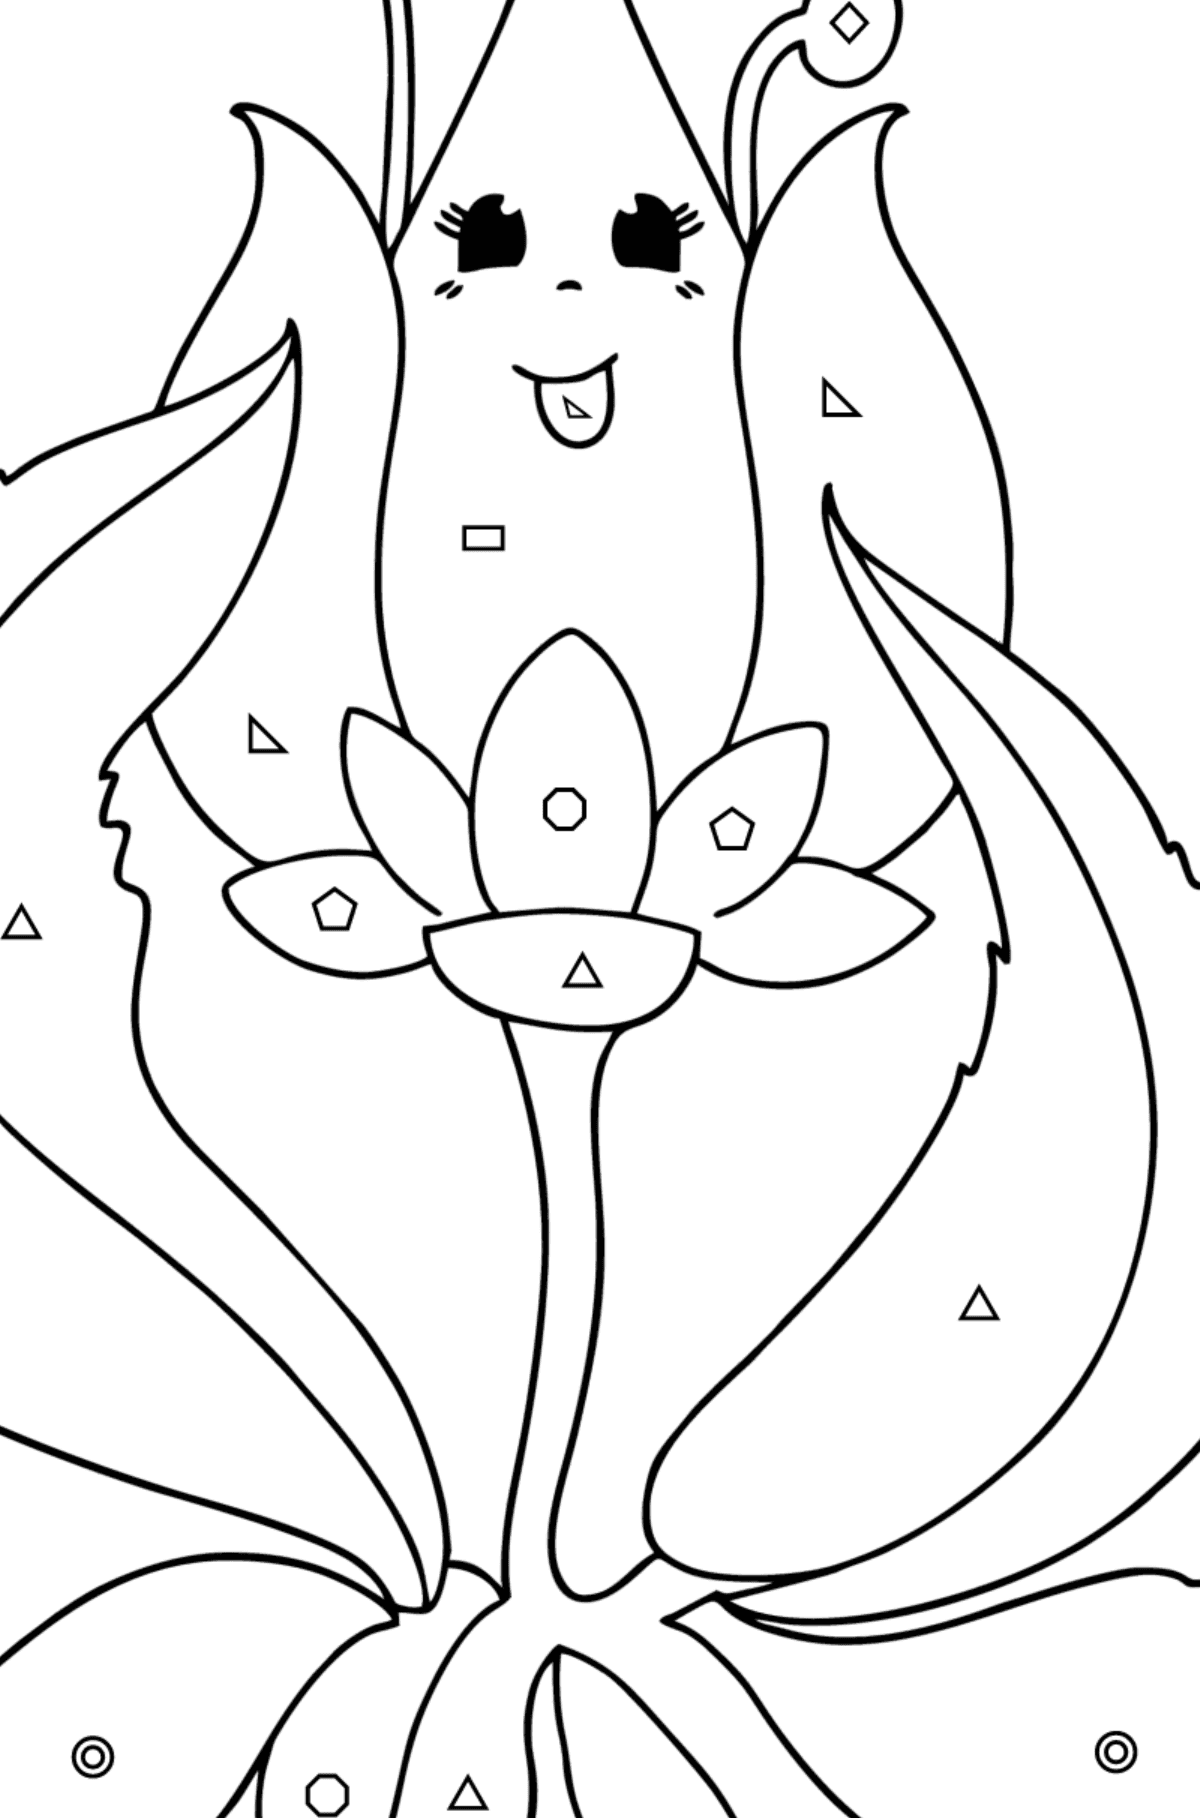 Bud with eyes coloring page - Coloring by Geometric Shapes for Kids